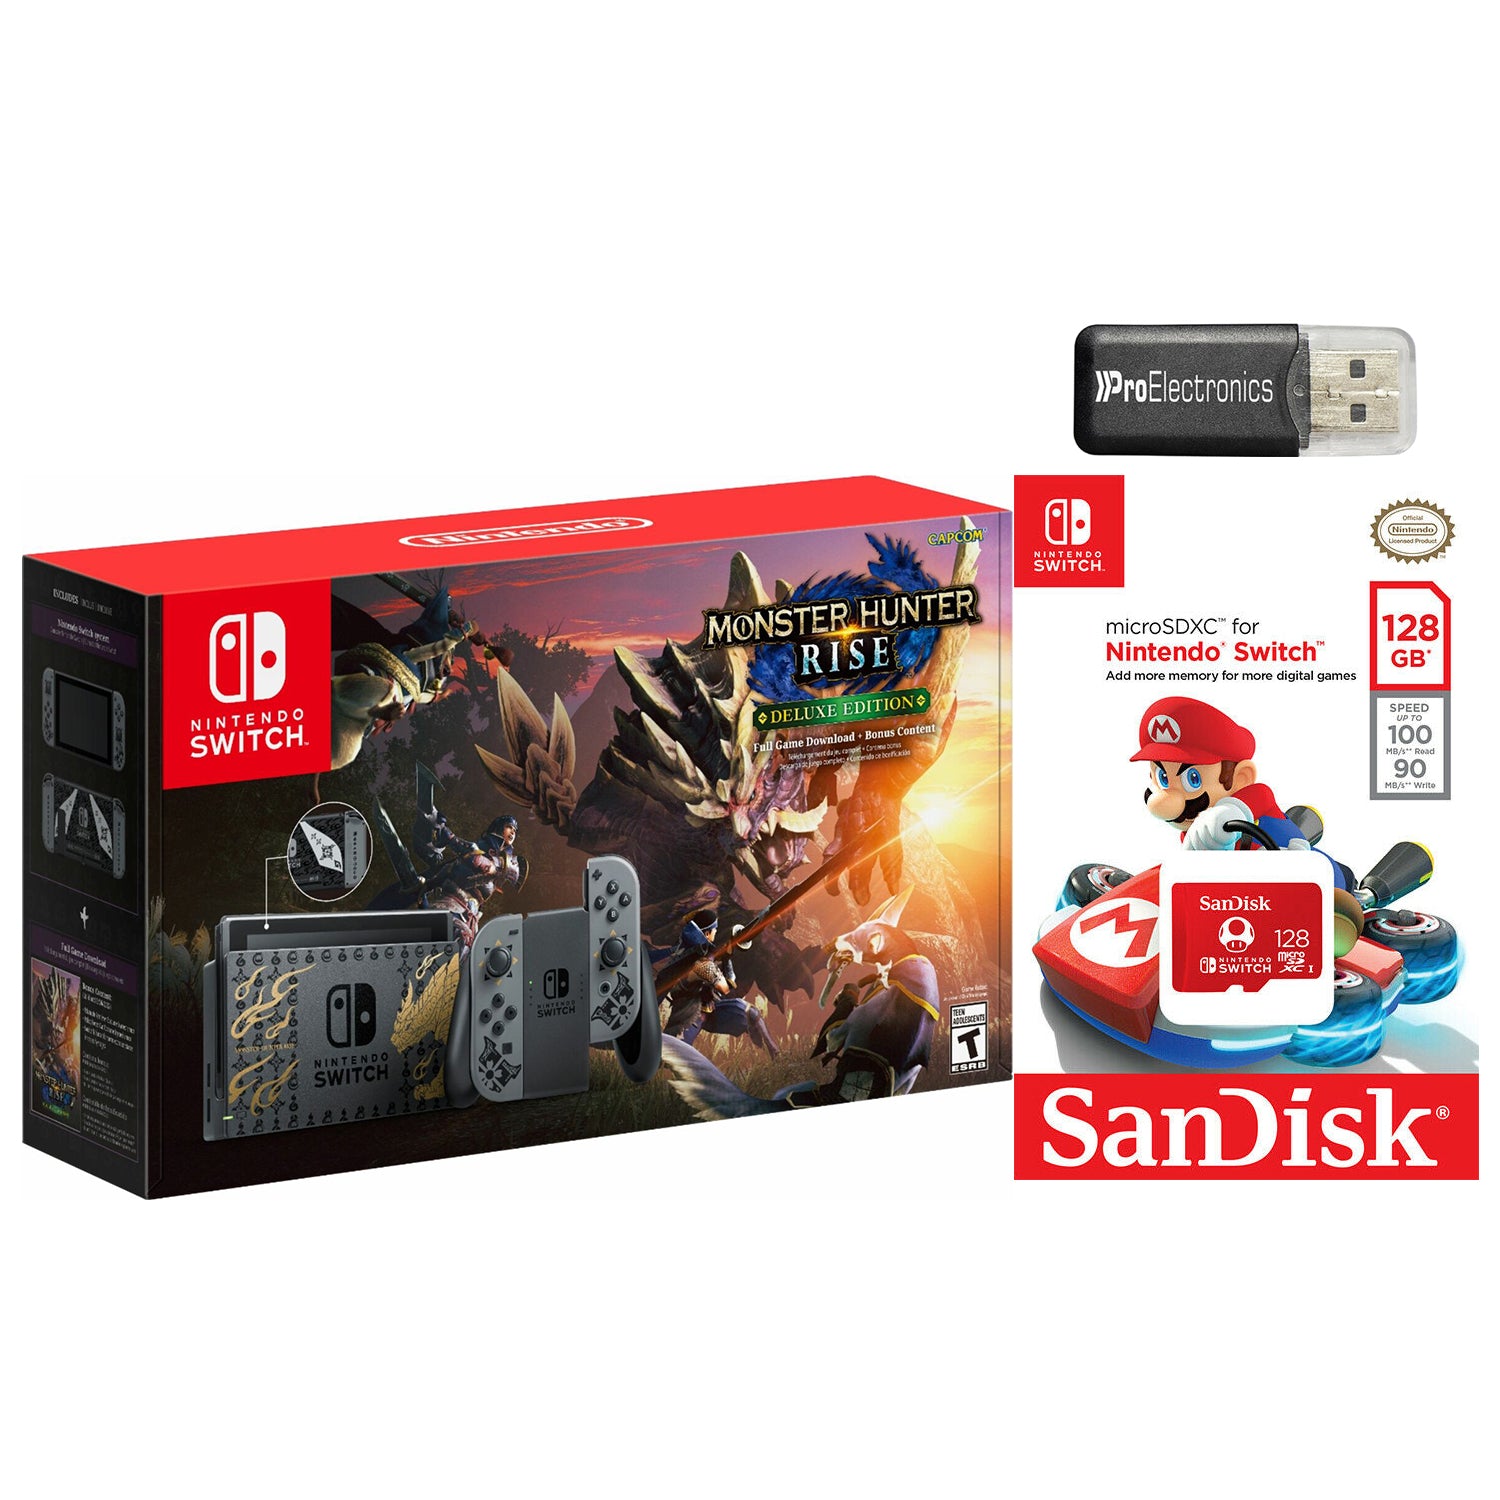 Nintendo MONSTER HUNTER RISE Deluxe Edition Sandisk 128GB MicroSD Card and MicroSD Card Reader Bundle freeshipping - Pro-Distributing